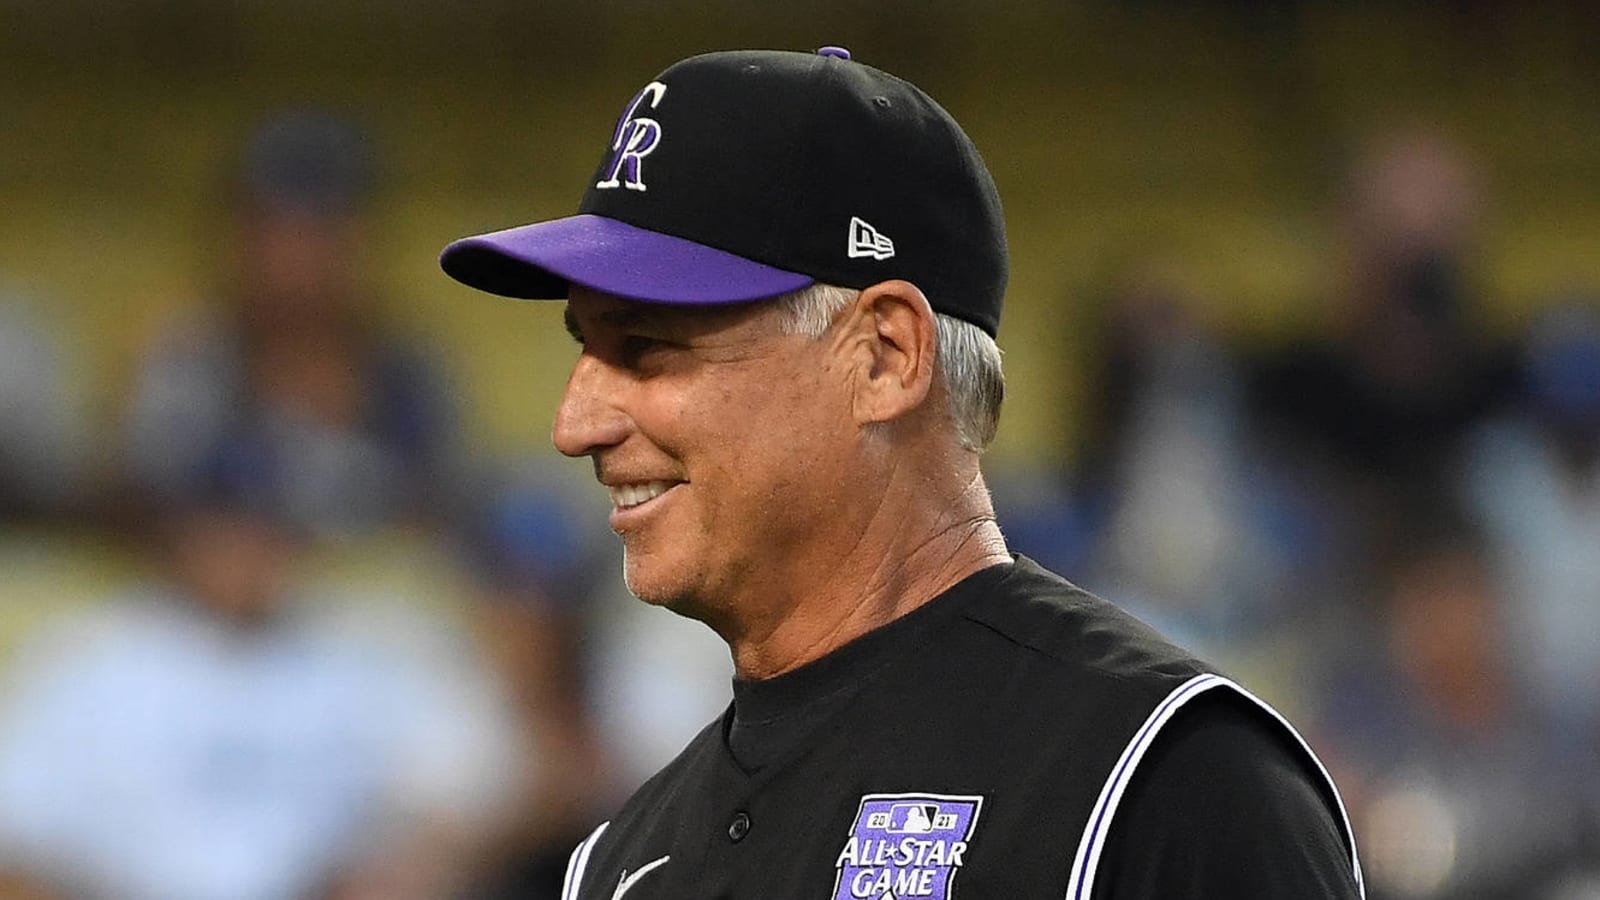 Rockies finalize their 2022 coaching staff with three new additions